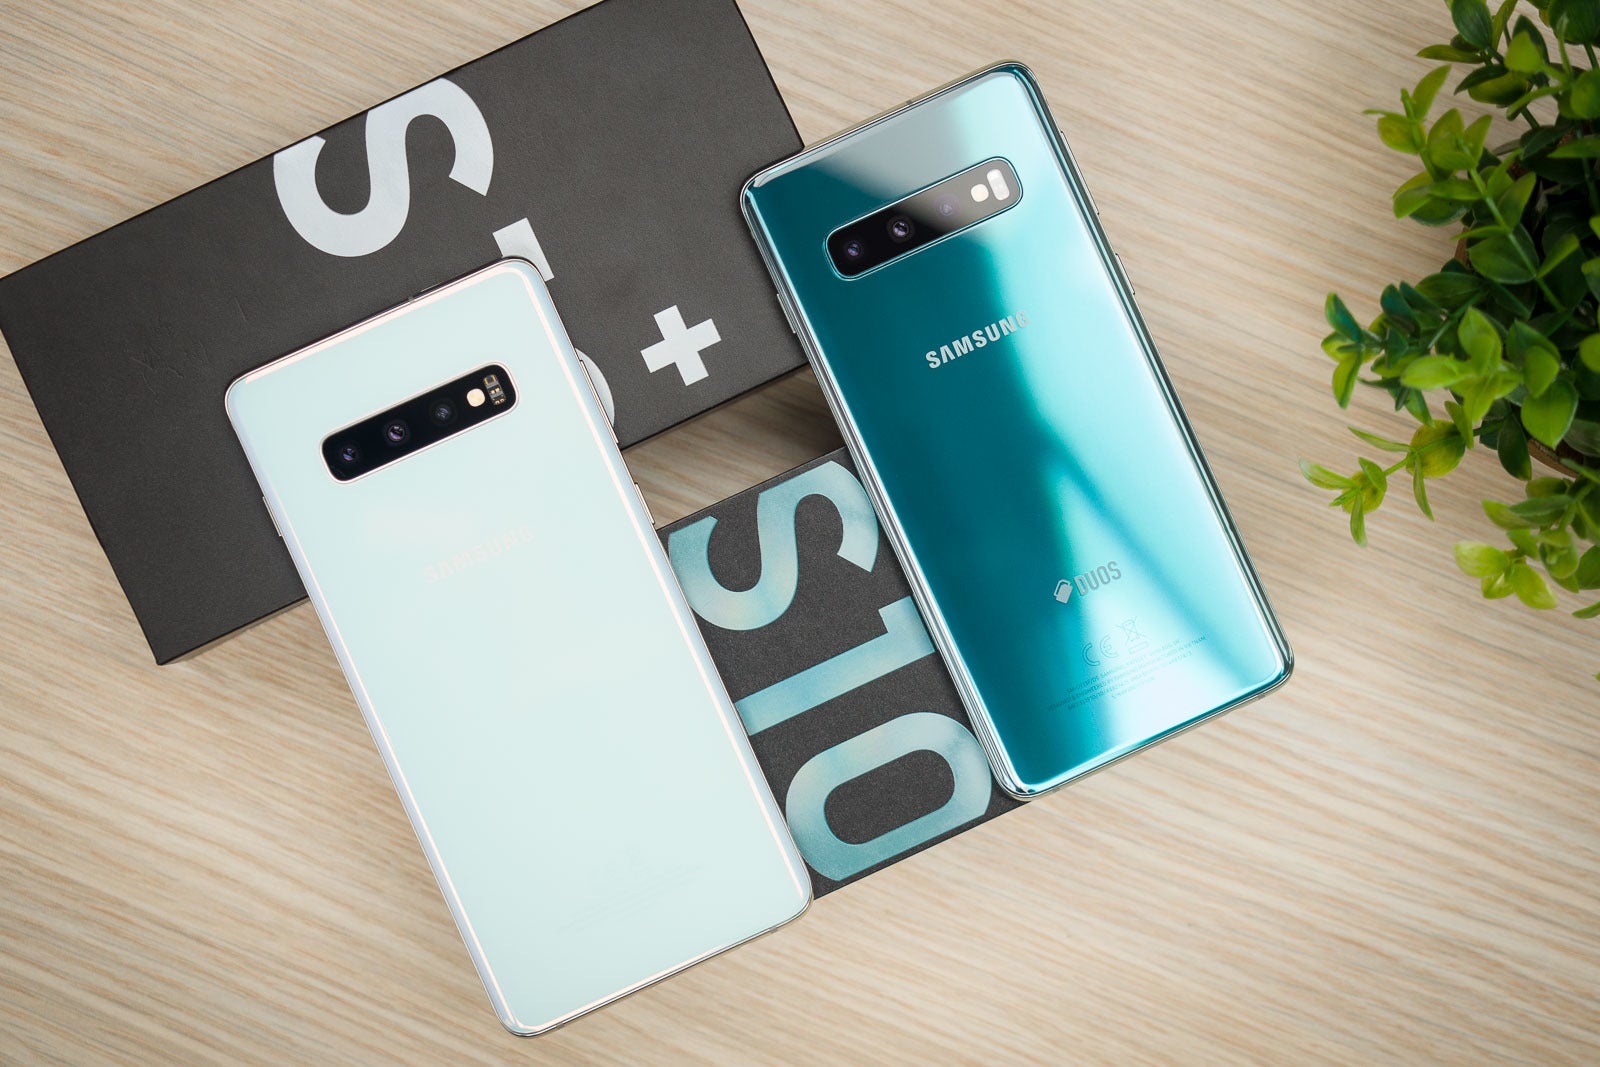 S10+ (left) and S10 (right) - Samsung Galaxy S10 and S10+ Review